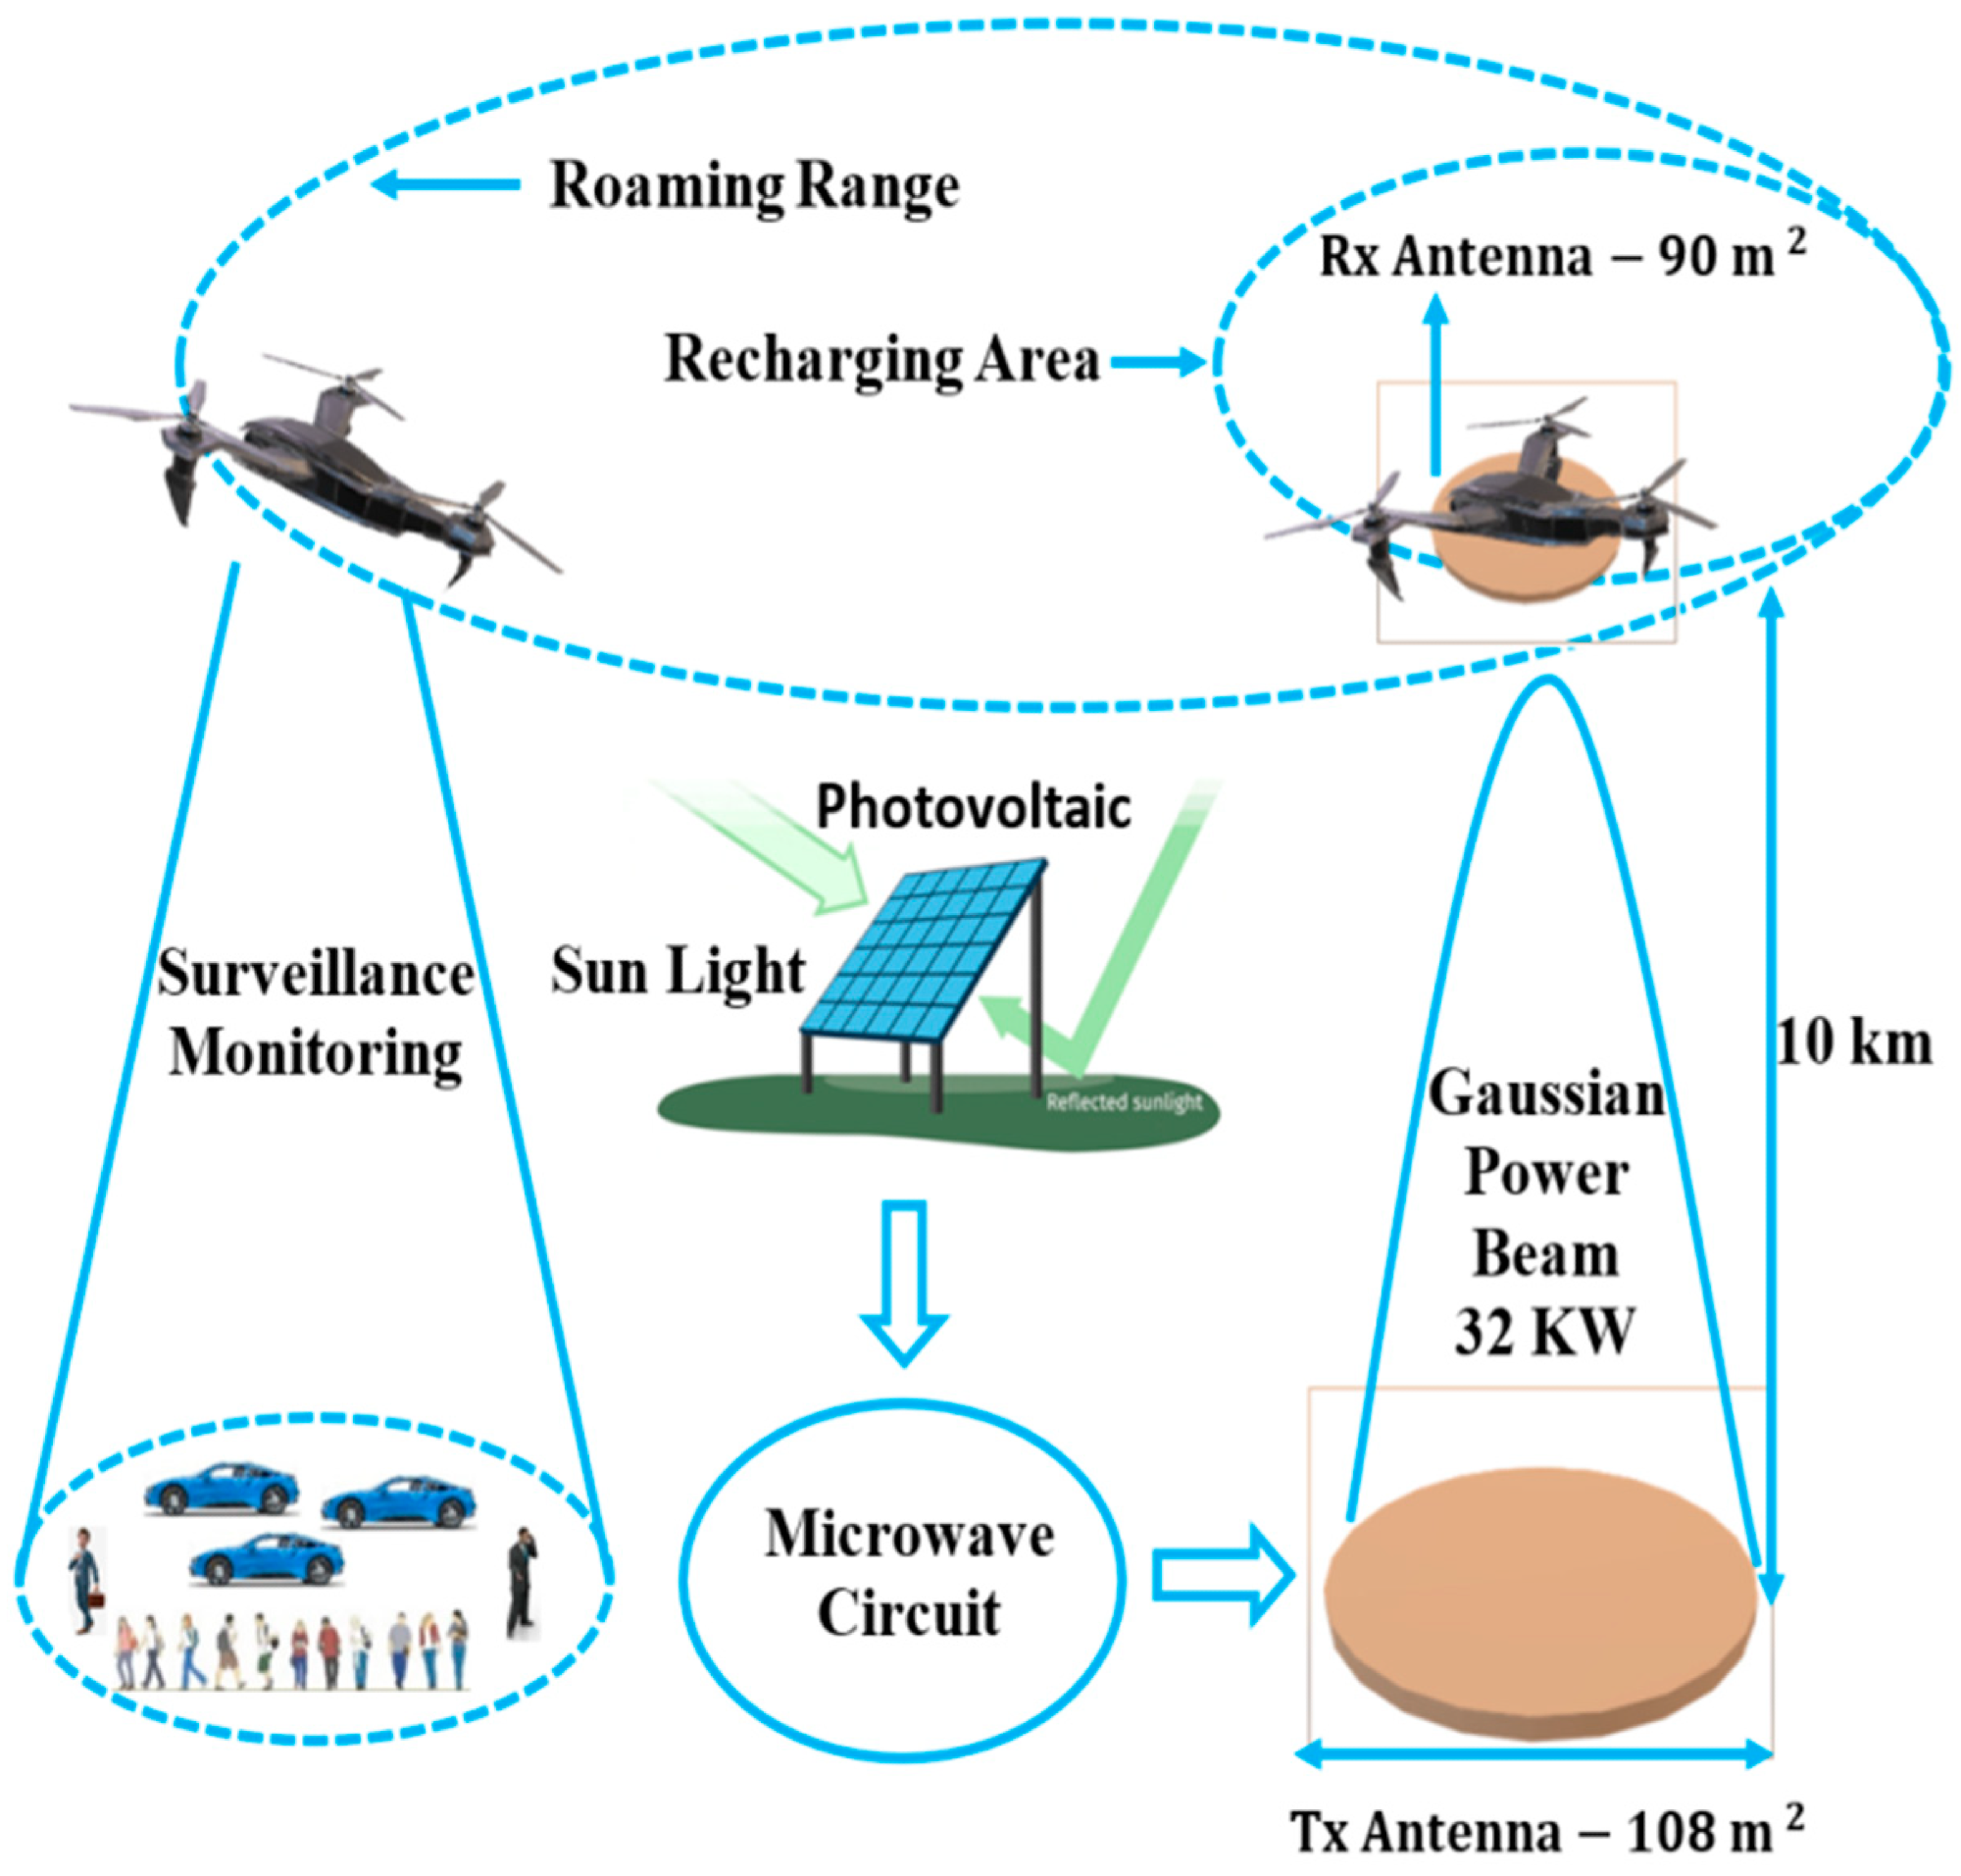 Proposed system architecture for microwave wireless power transmission.